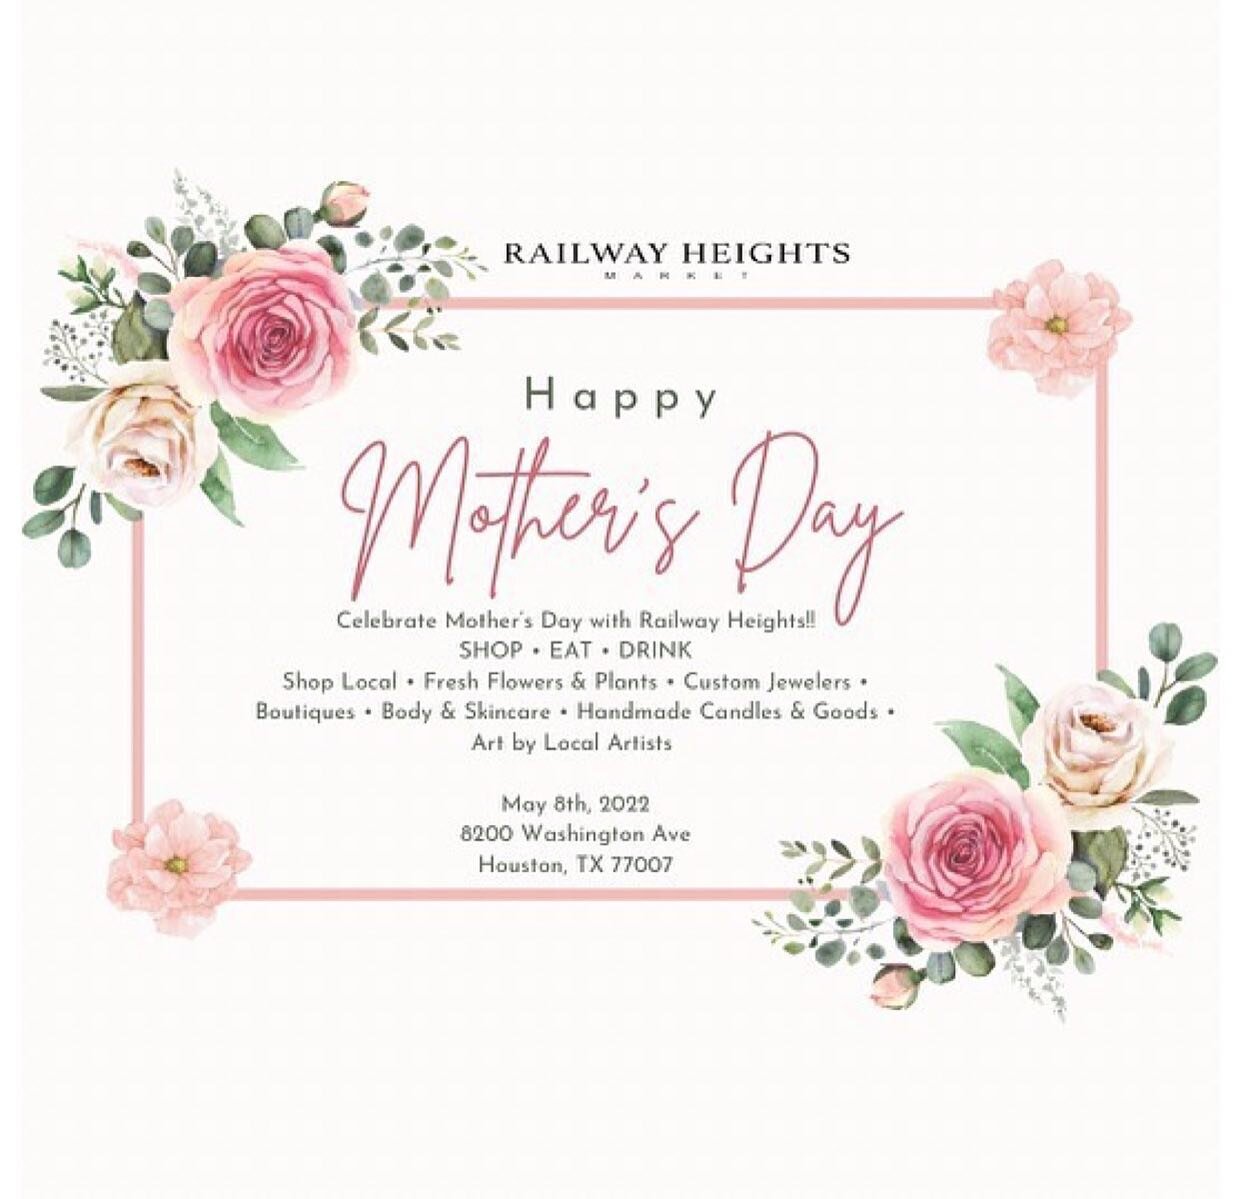 Happy Mother&rsquo;s Day to all you sweet moms.. There is no one sweeter than you! 💐✨

#mothersday #mothersdayinhouston #houstontx #houston #htx #eventsinhouston #railwayheightsmarket #railwayheights #railwayheightshouston #mothersdaygift #mothersda